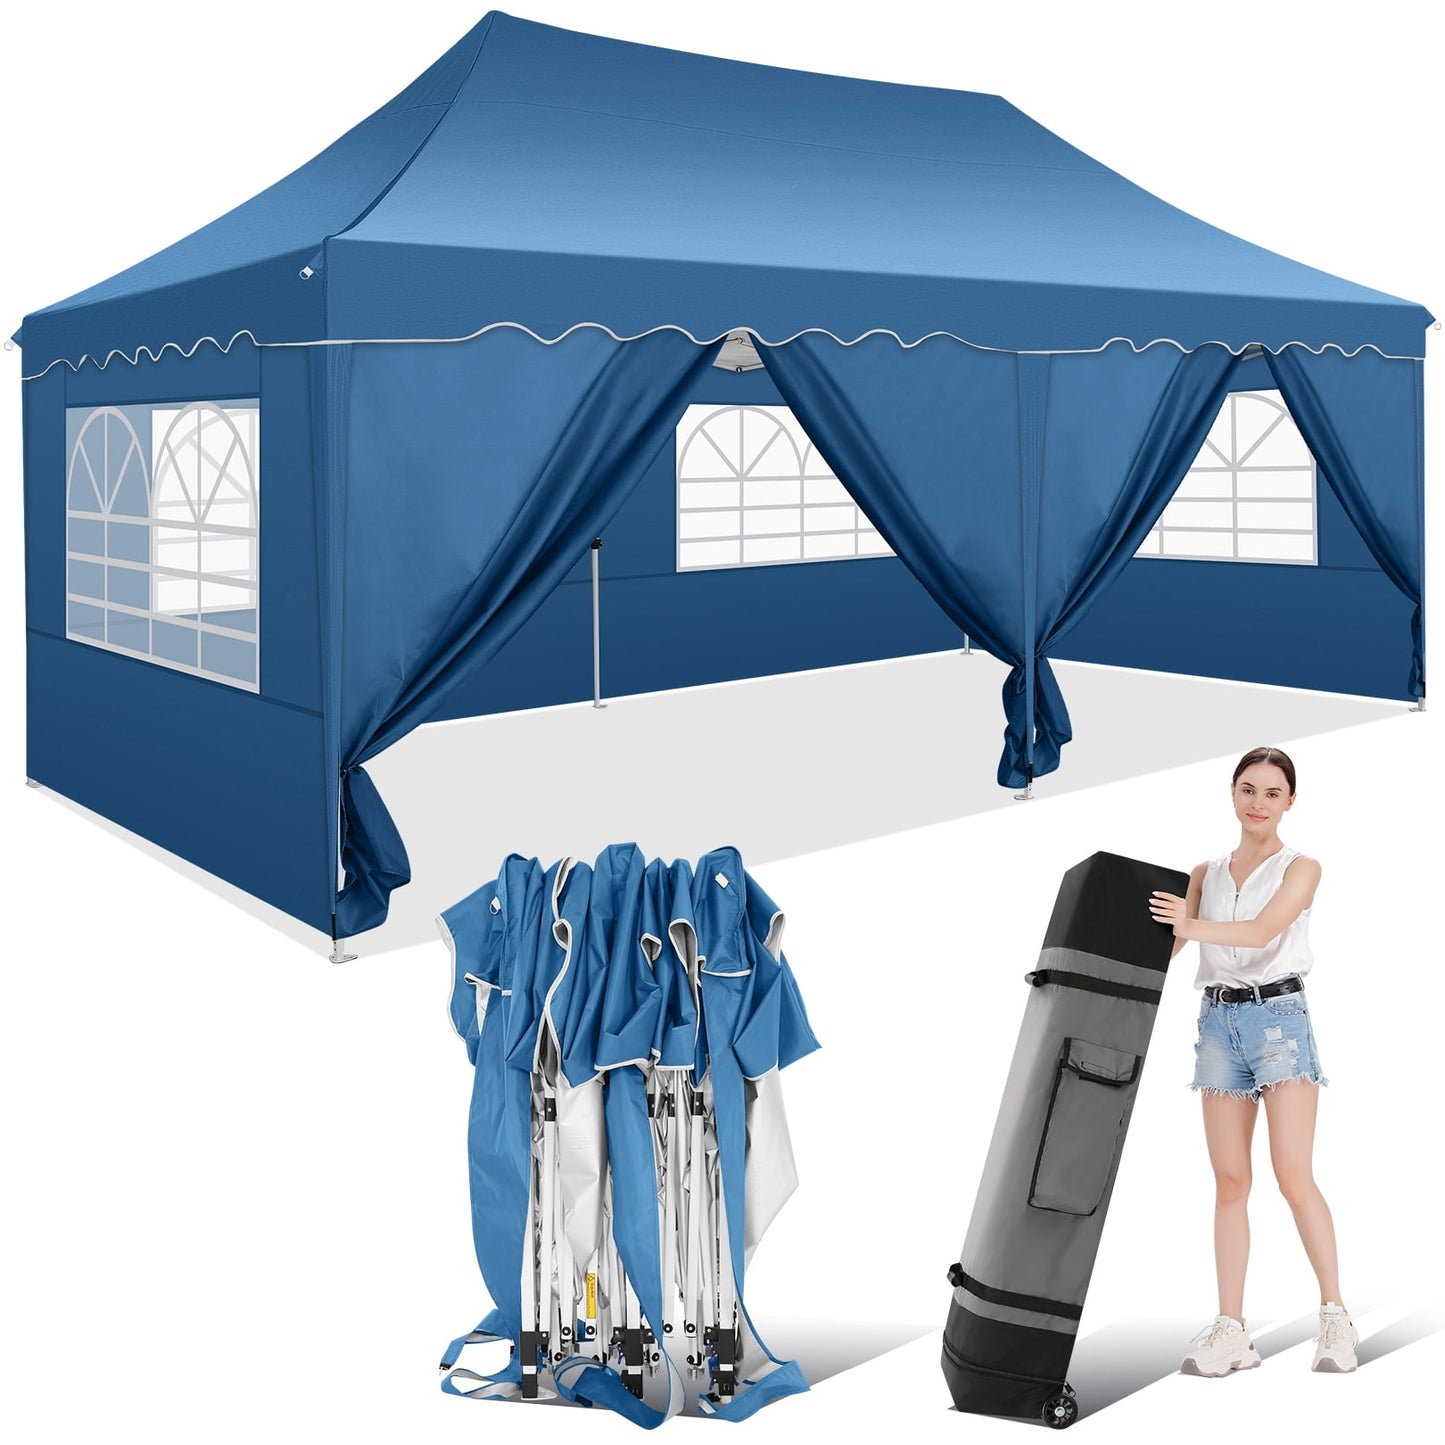 SANOPY 10'x 20' Canopy Pop up Outdoor Canopy Tent Party Patio Canopy Shelter Events Instant Tent Gazebo with 6 Removable Side Walls, 10 Ground Spikes, 4 Ropes and Roller Bag